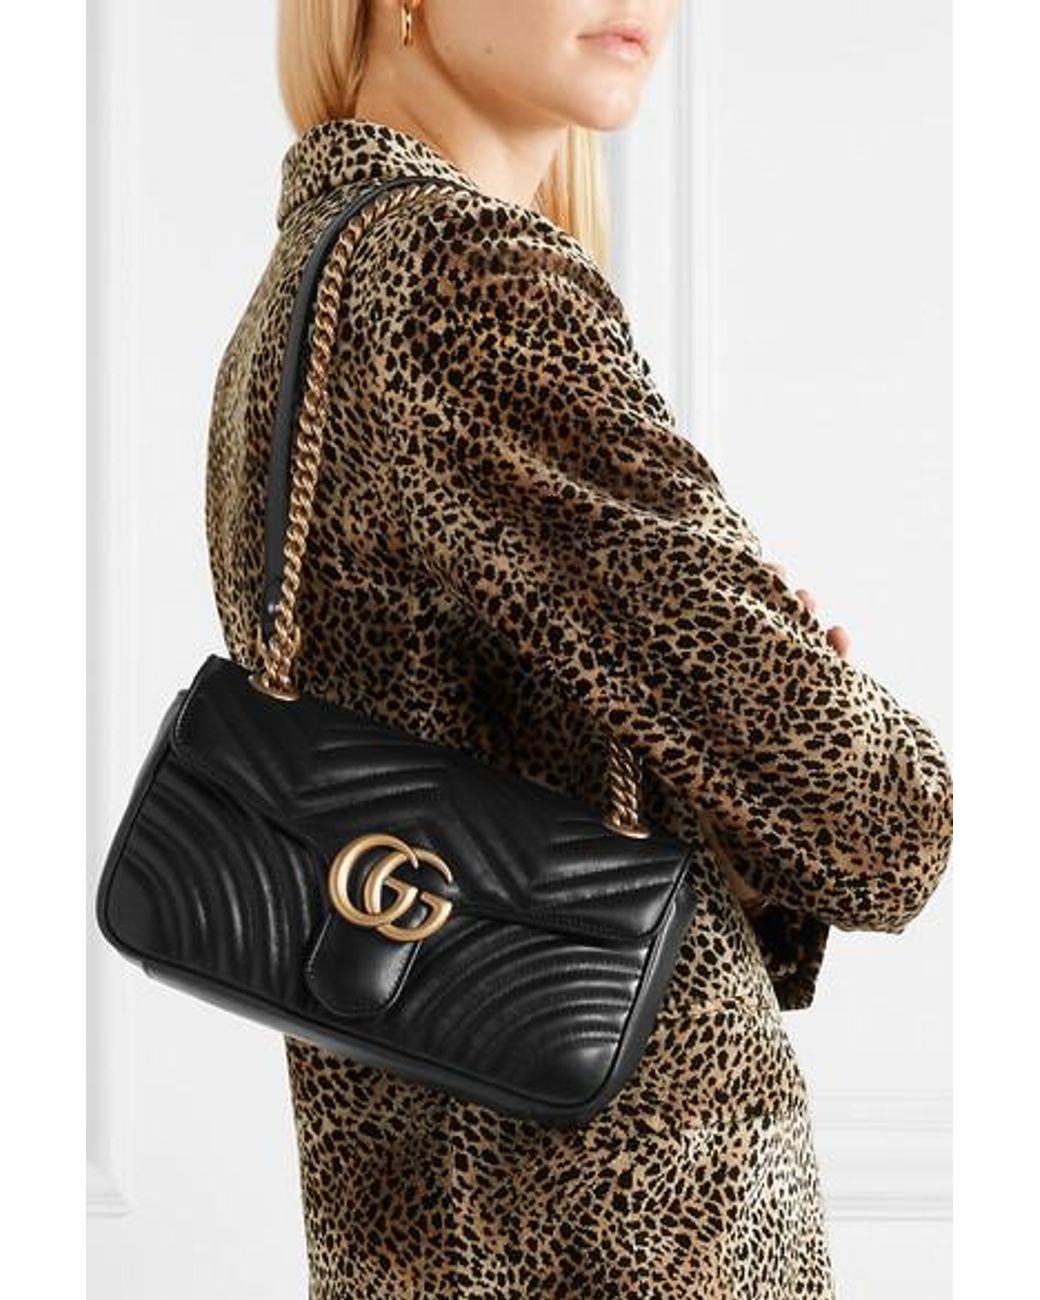 Gucci Shoulder Bag Gg Marmont Small Size In Matelassè Leather Worked With  Chevron Pattern And Heart On The Back in Black | Lyst